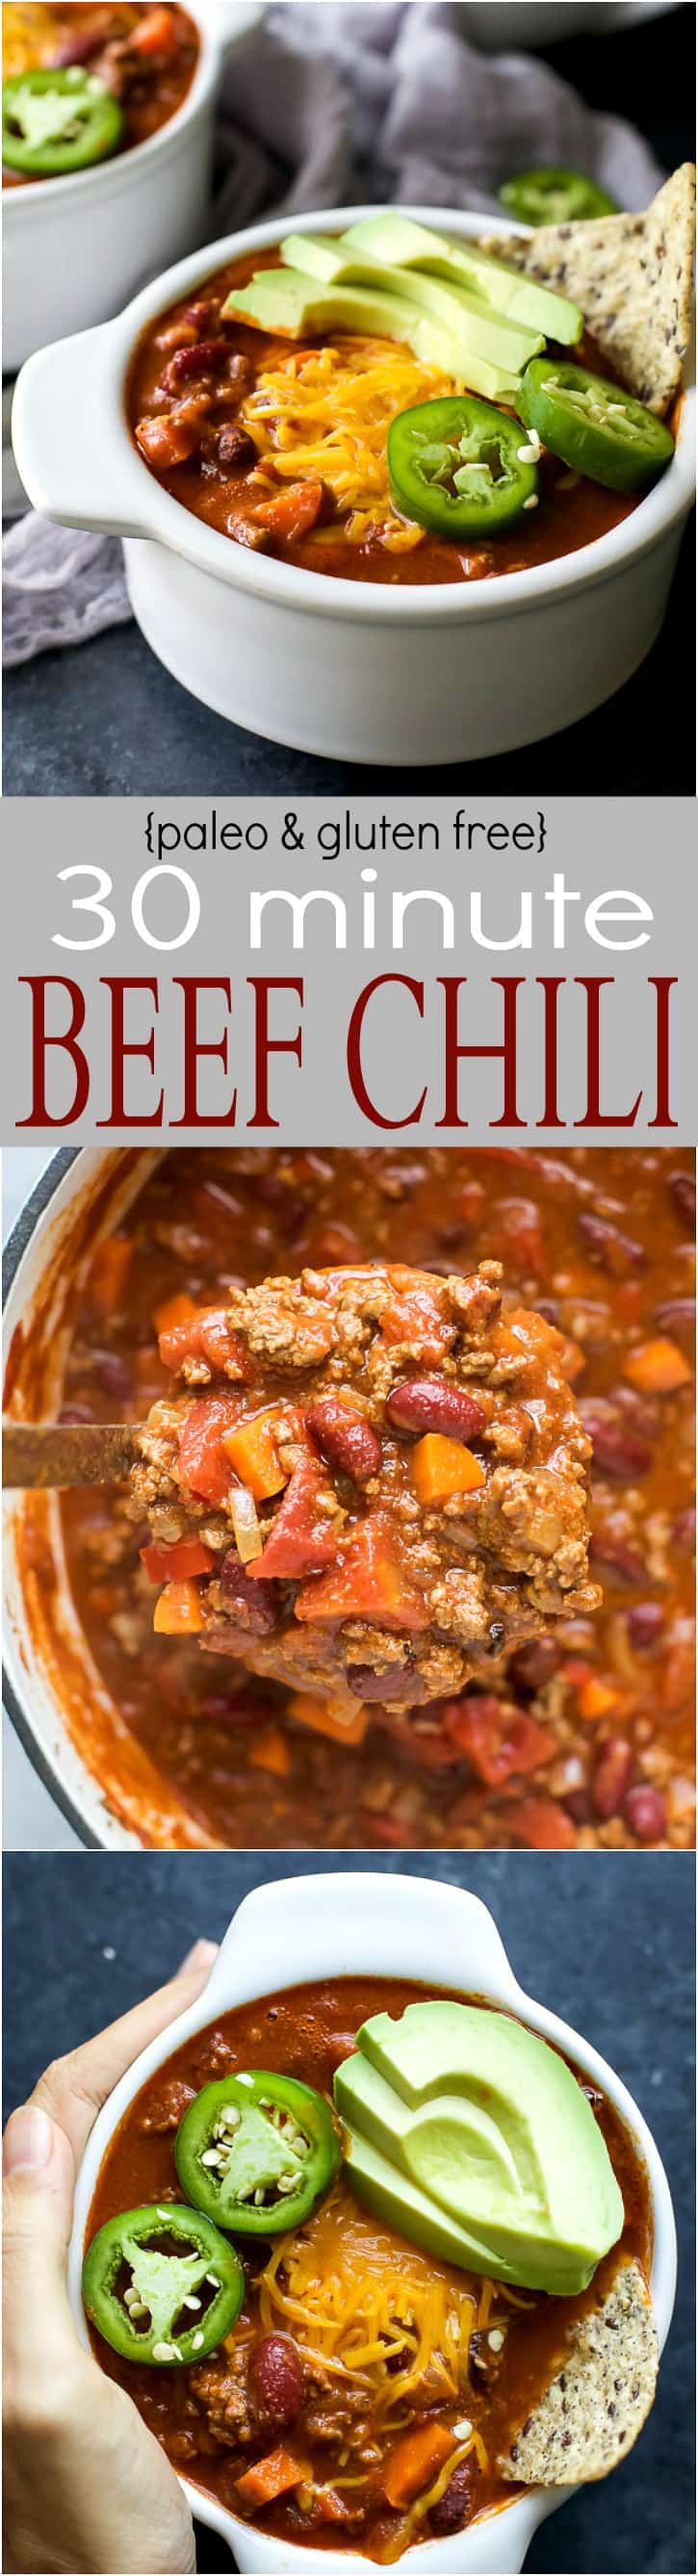 The ULTIMATE 30 Minute Beef Chili Recipe - perfectly spiced for a deep hearty chili taste you'll love. Filled with veggies, ground beef, rich spices, and kidney beans for the best chili bite! {paleo & gluten free}